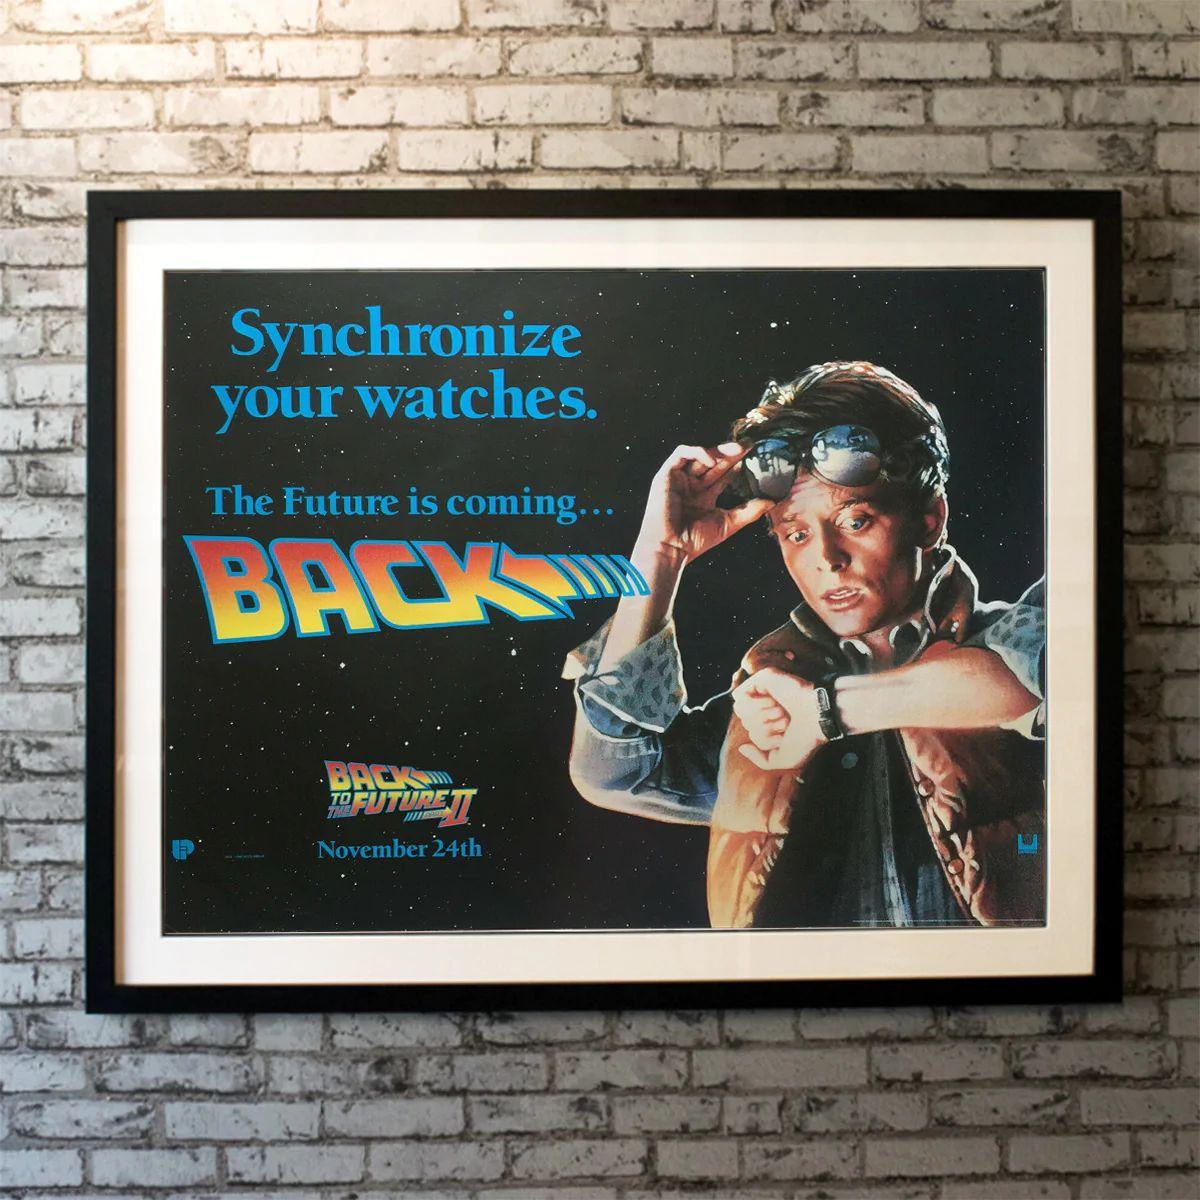 Back To The Future Part II, Unframed Poster, 1989

Original British Quad (30 X 40 Inches). After visiting 2015, Marty McFly must repeat his visit to 1955 to prevent disastrous changes to 1985...without interfering with his first trip.

Year: